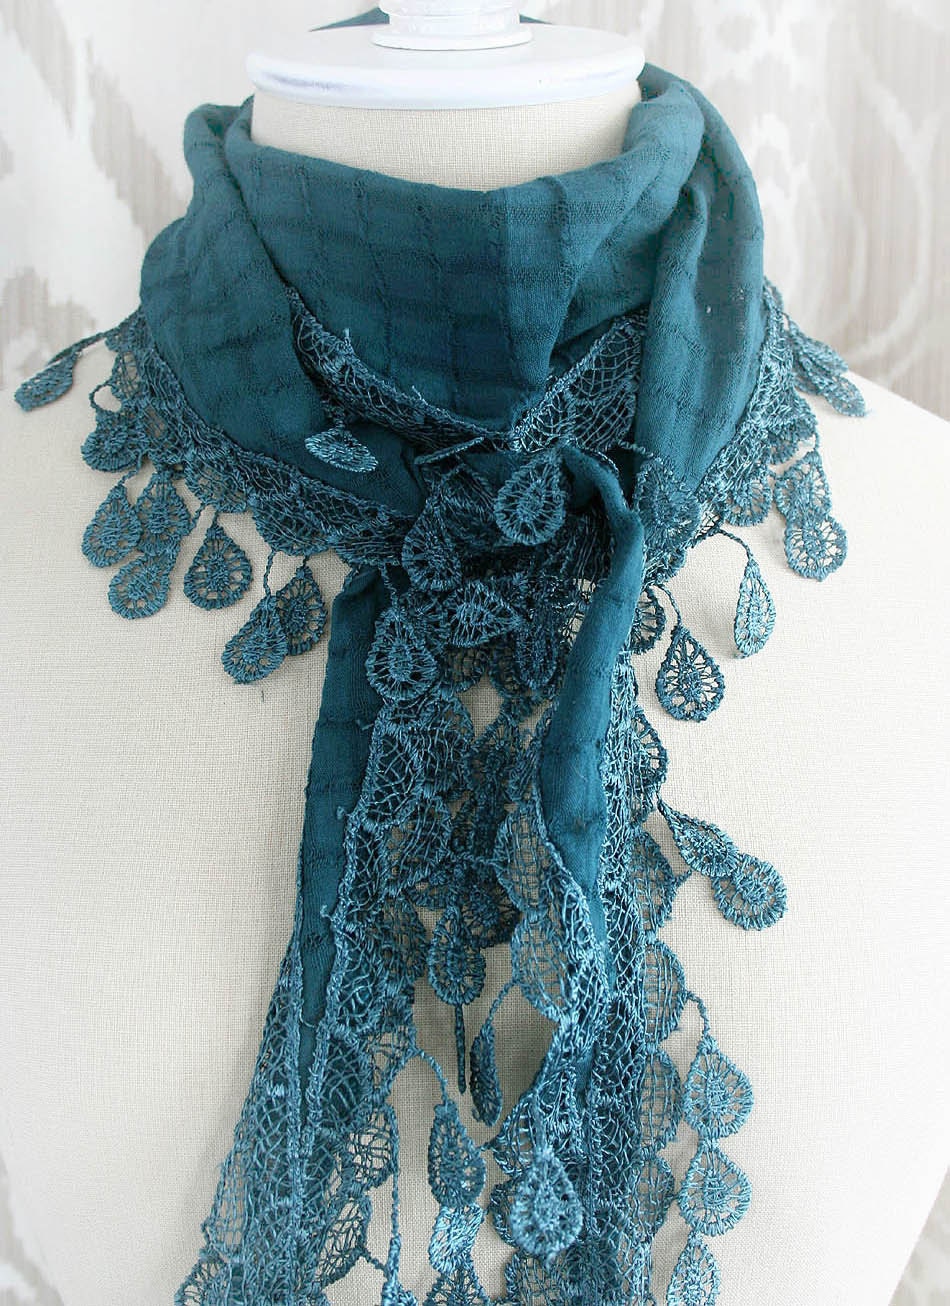 RAIN DROPS lace scarf vintage Victorian inspired lace scarf